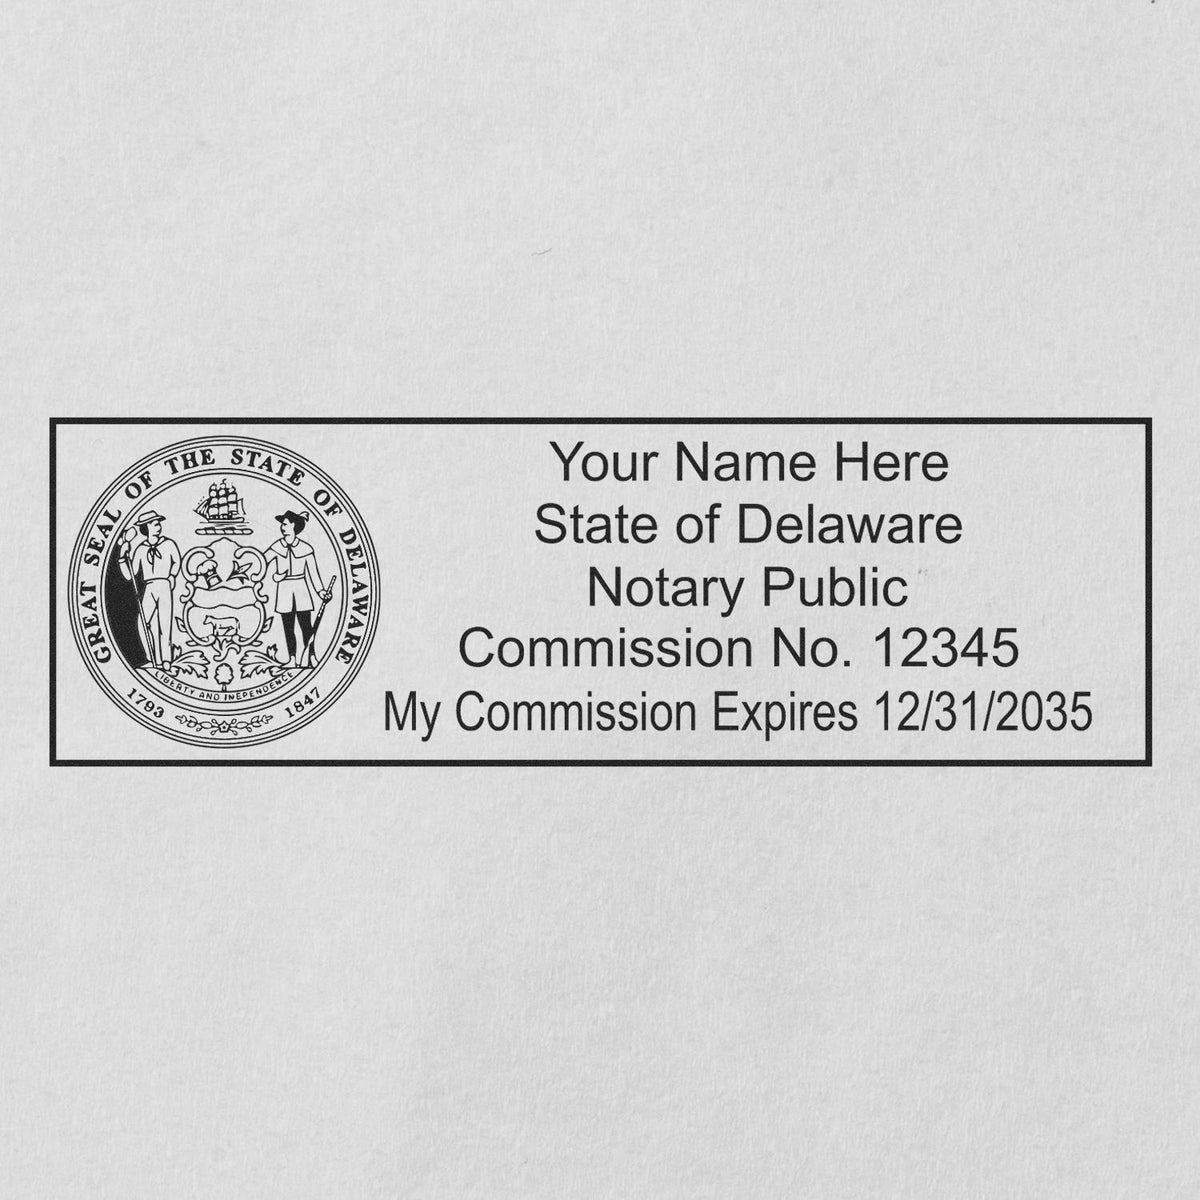 This paper is stamped with a sample imprint of the Slim Pre-Inked State Seal Notary Stamp for Delaware, signifying its quality and reliability.